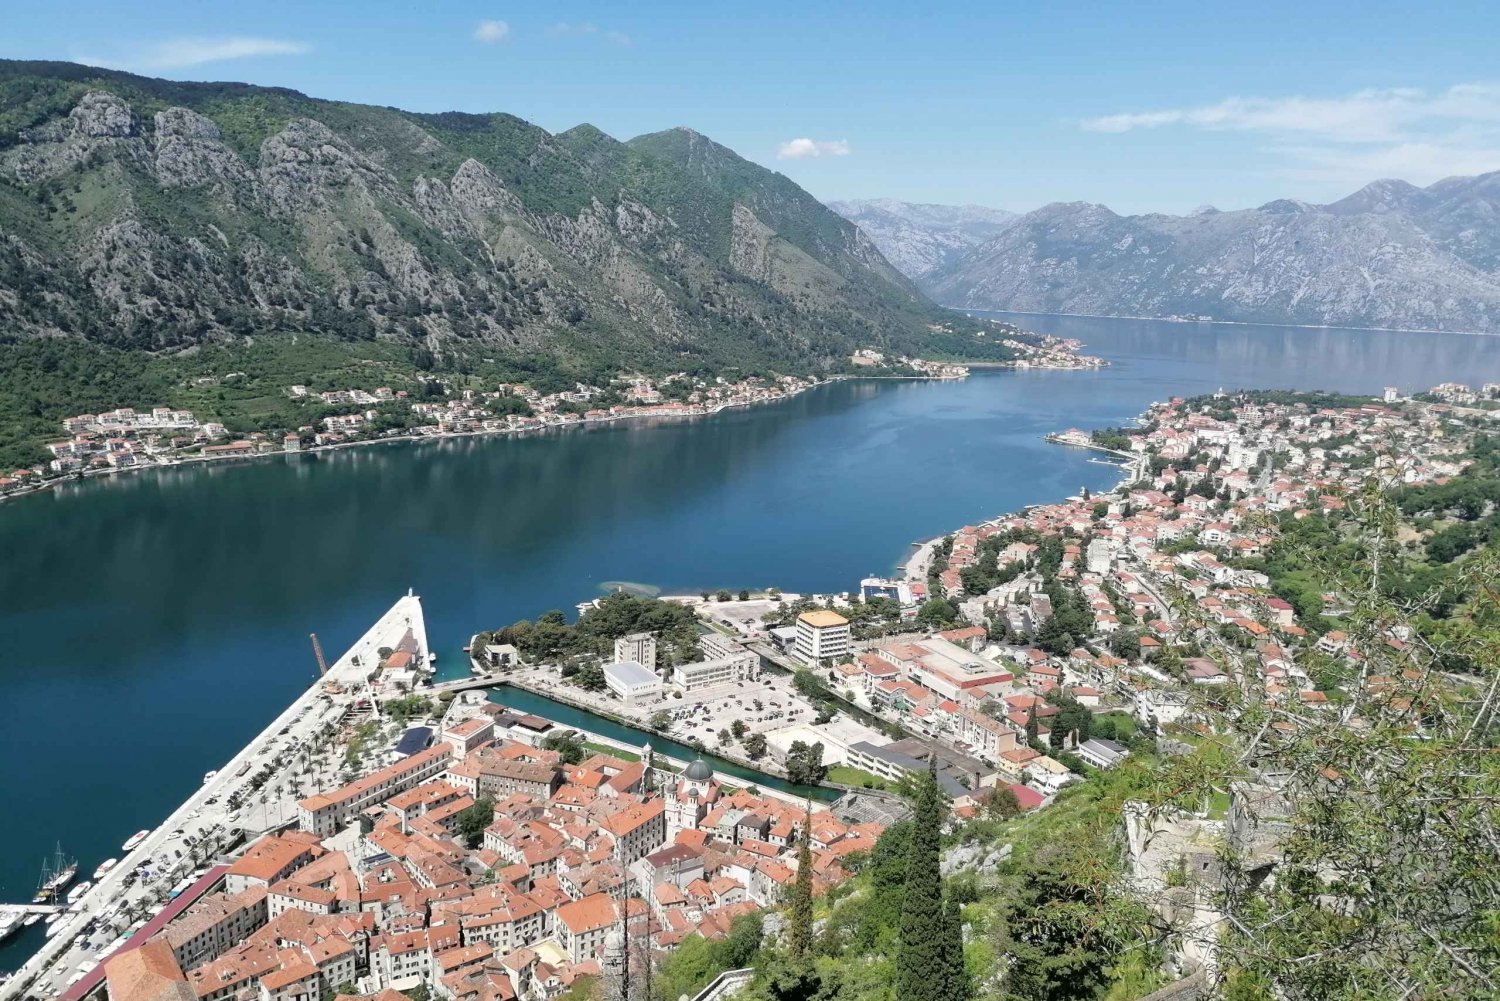 Kotor: Old Caravan Trail Guided Hike with Cheese Tasting